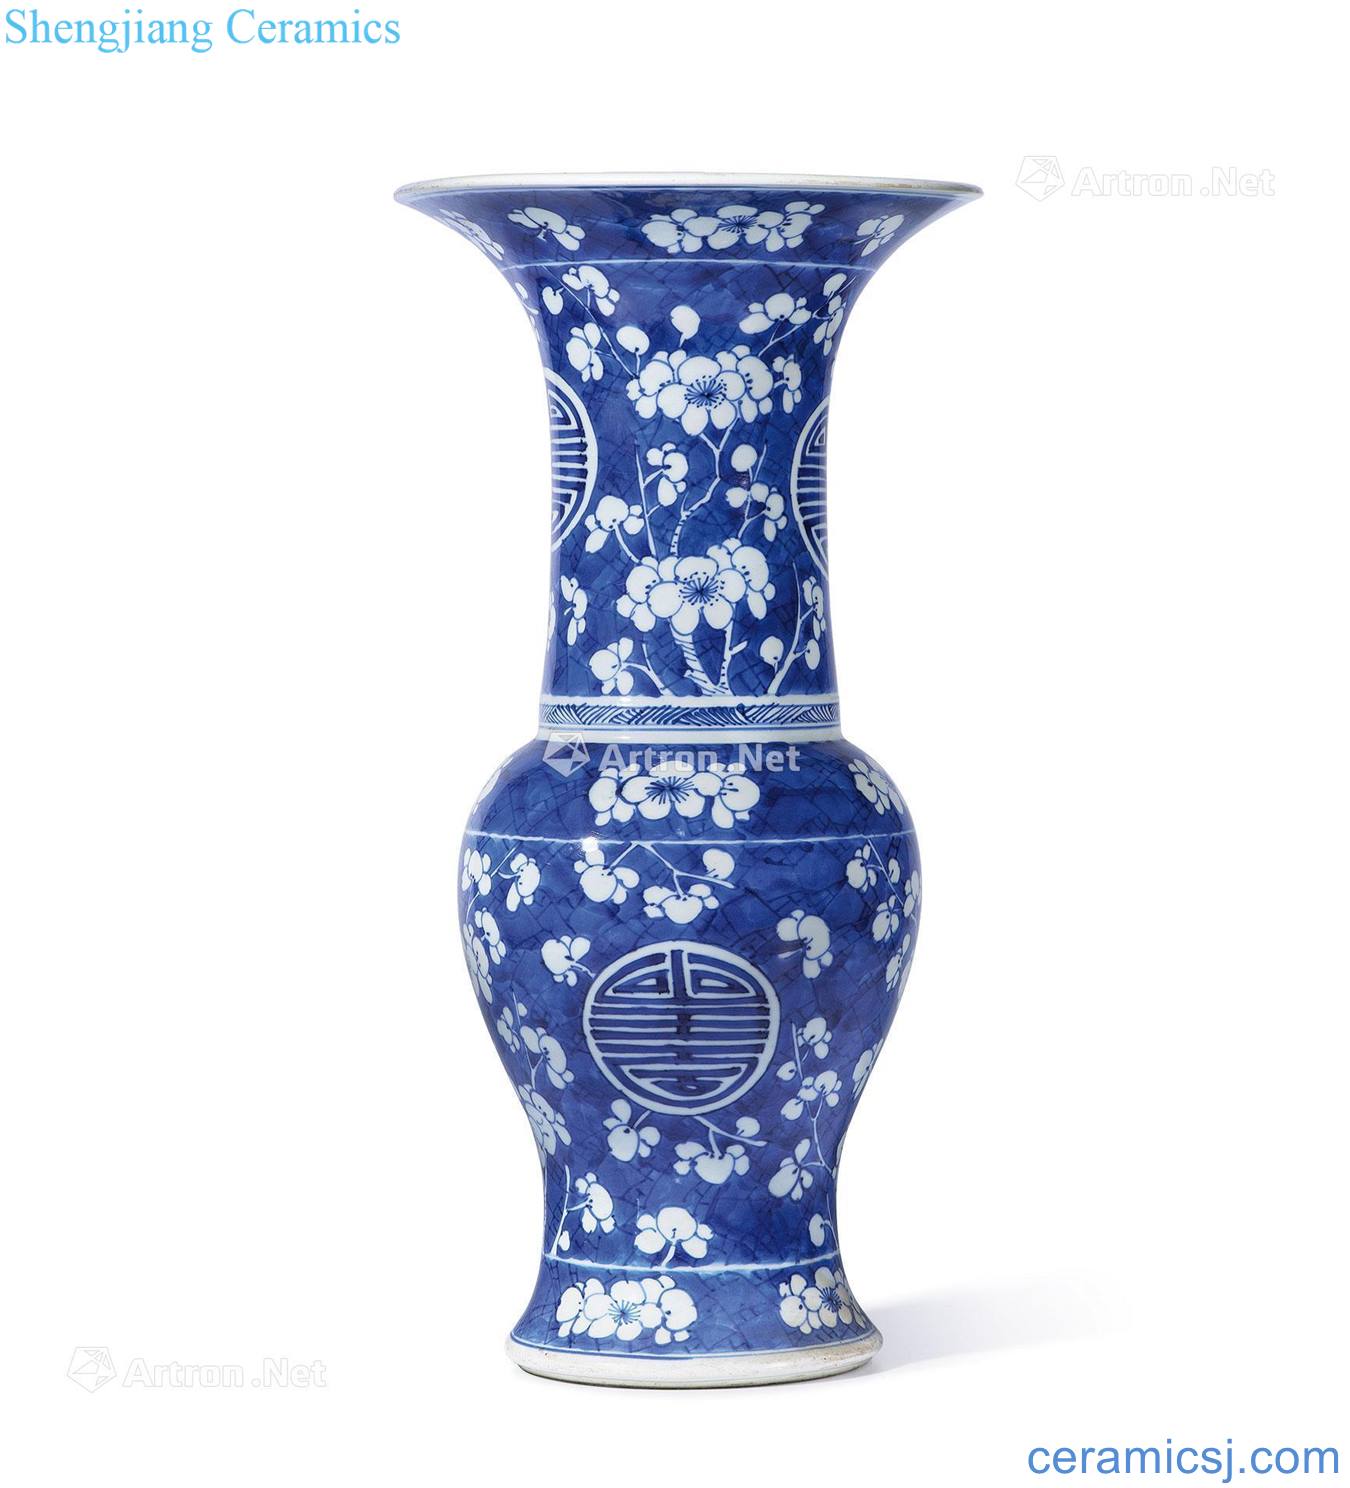 The qing emperor kangxi Mei group long-lived grain flower vase with blue and white ice